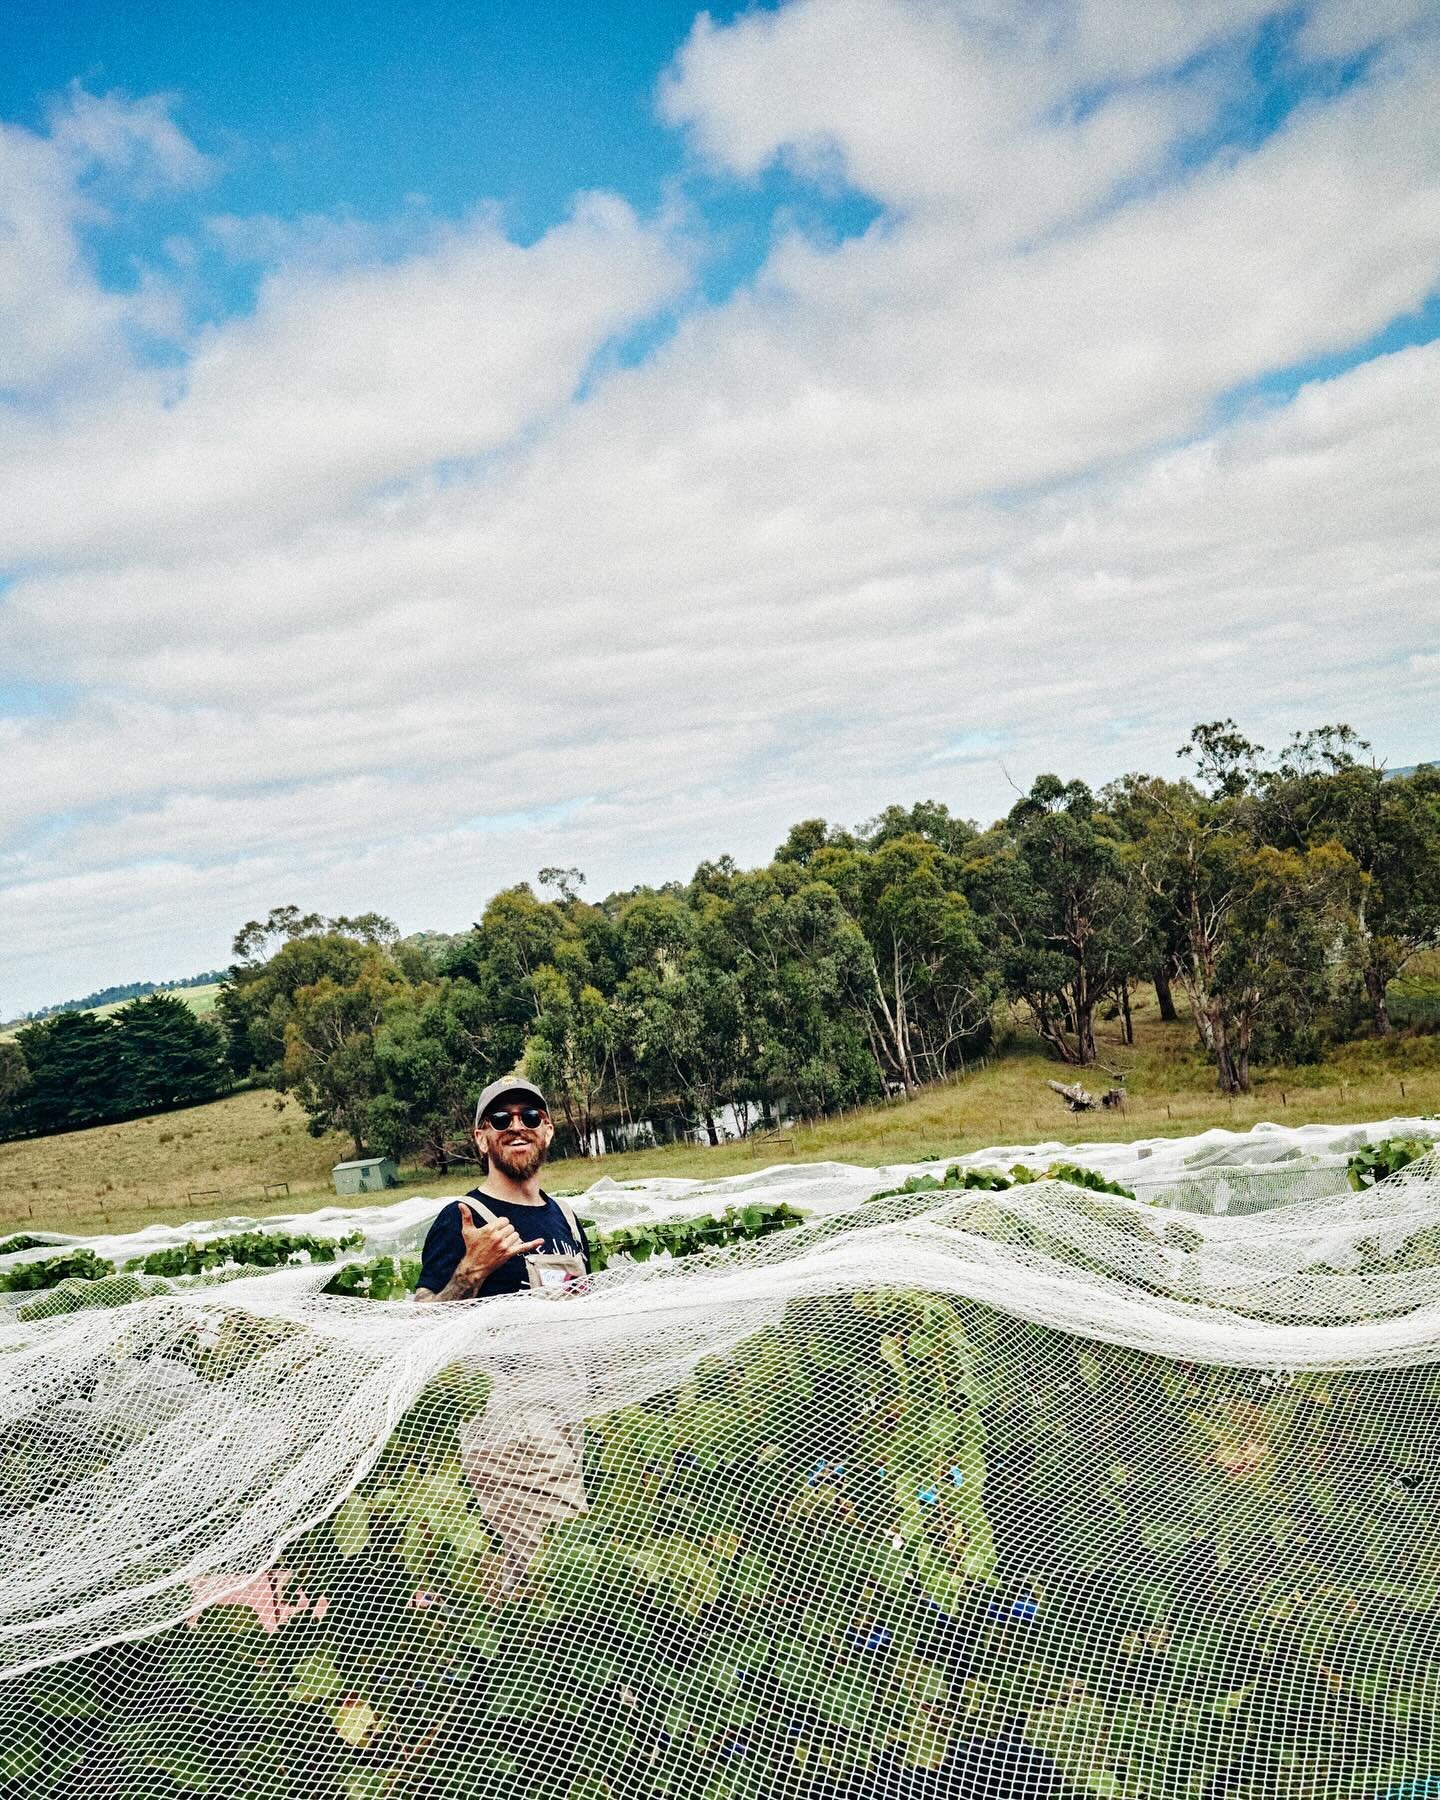 Sailing in a sea of nets below dreamy #summer skies 🌞

#Vintage 2024 is definitely one to fondly reflect upon, with plenty to #smiles while we made some amazing #wines 💙

Happy days 💚🌿

#tilliejwines #yarravalley #yarravalleypinotnoir #yarravalle